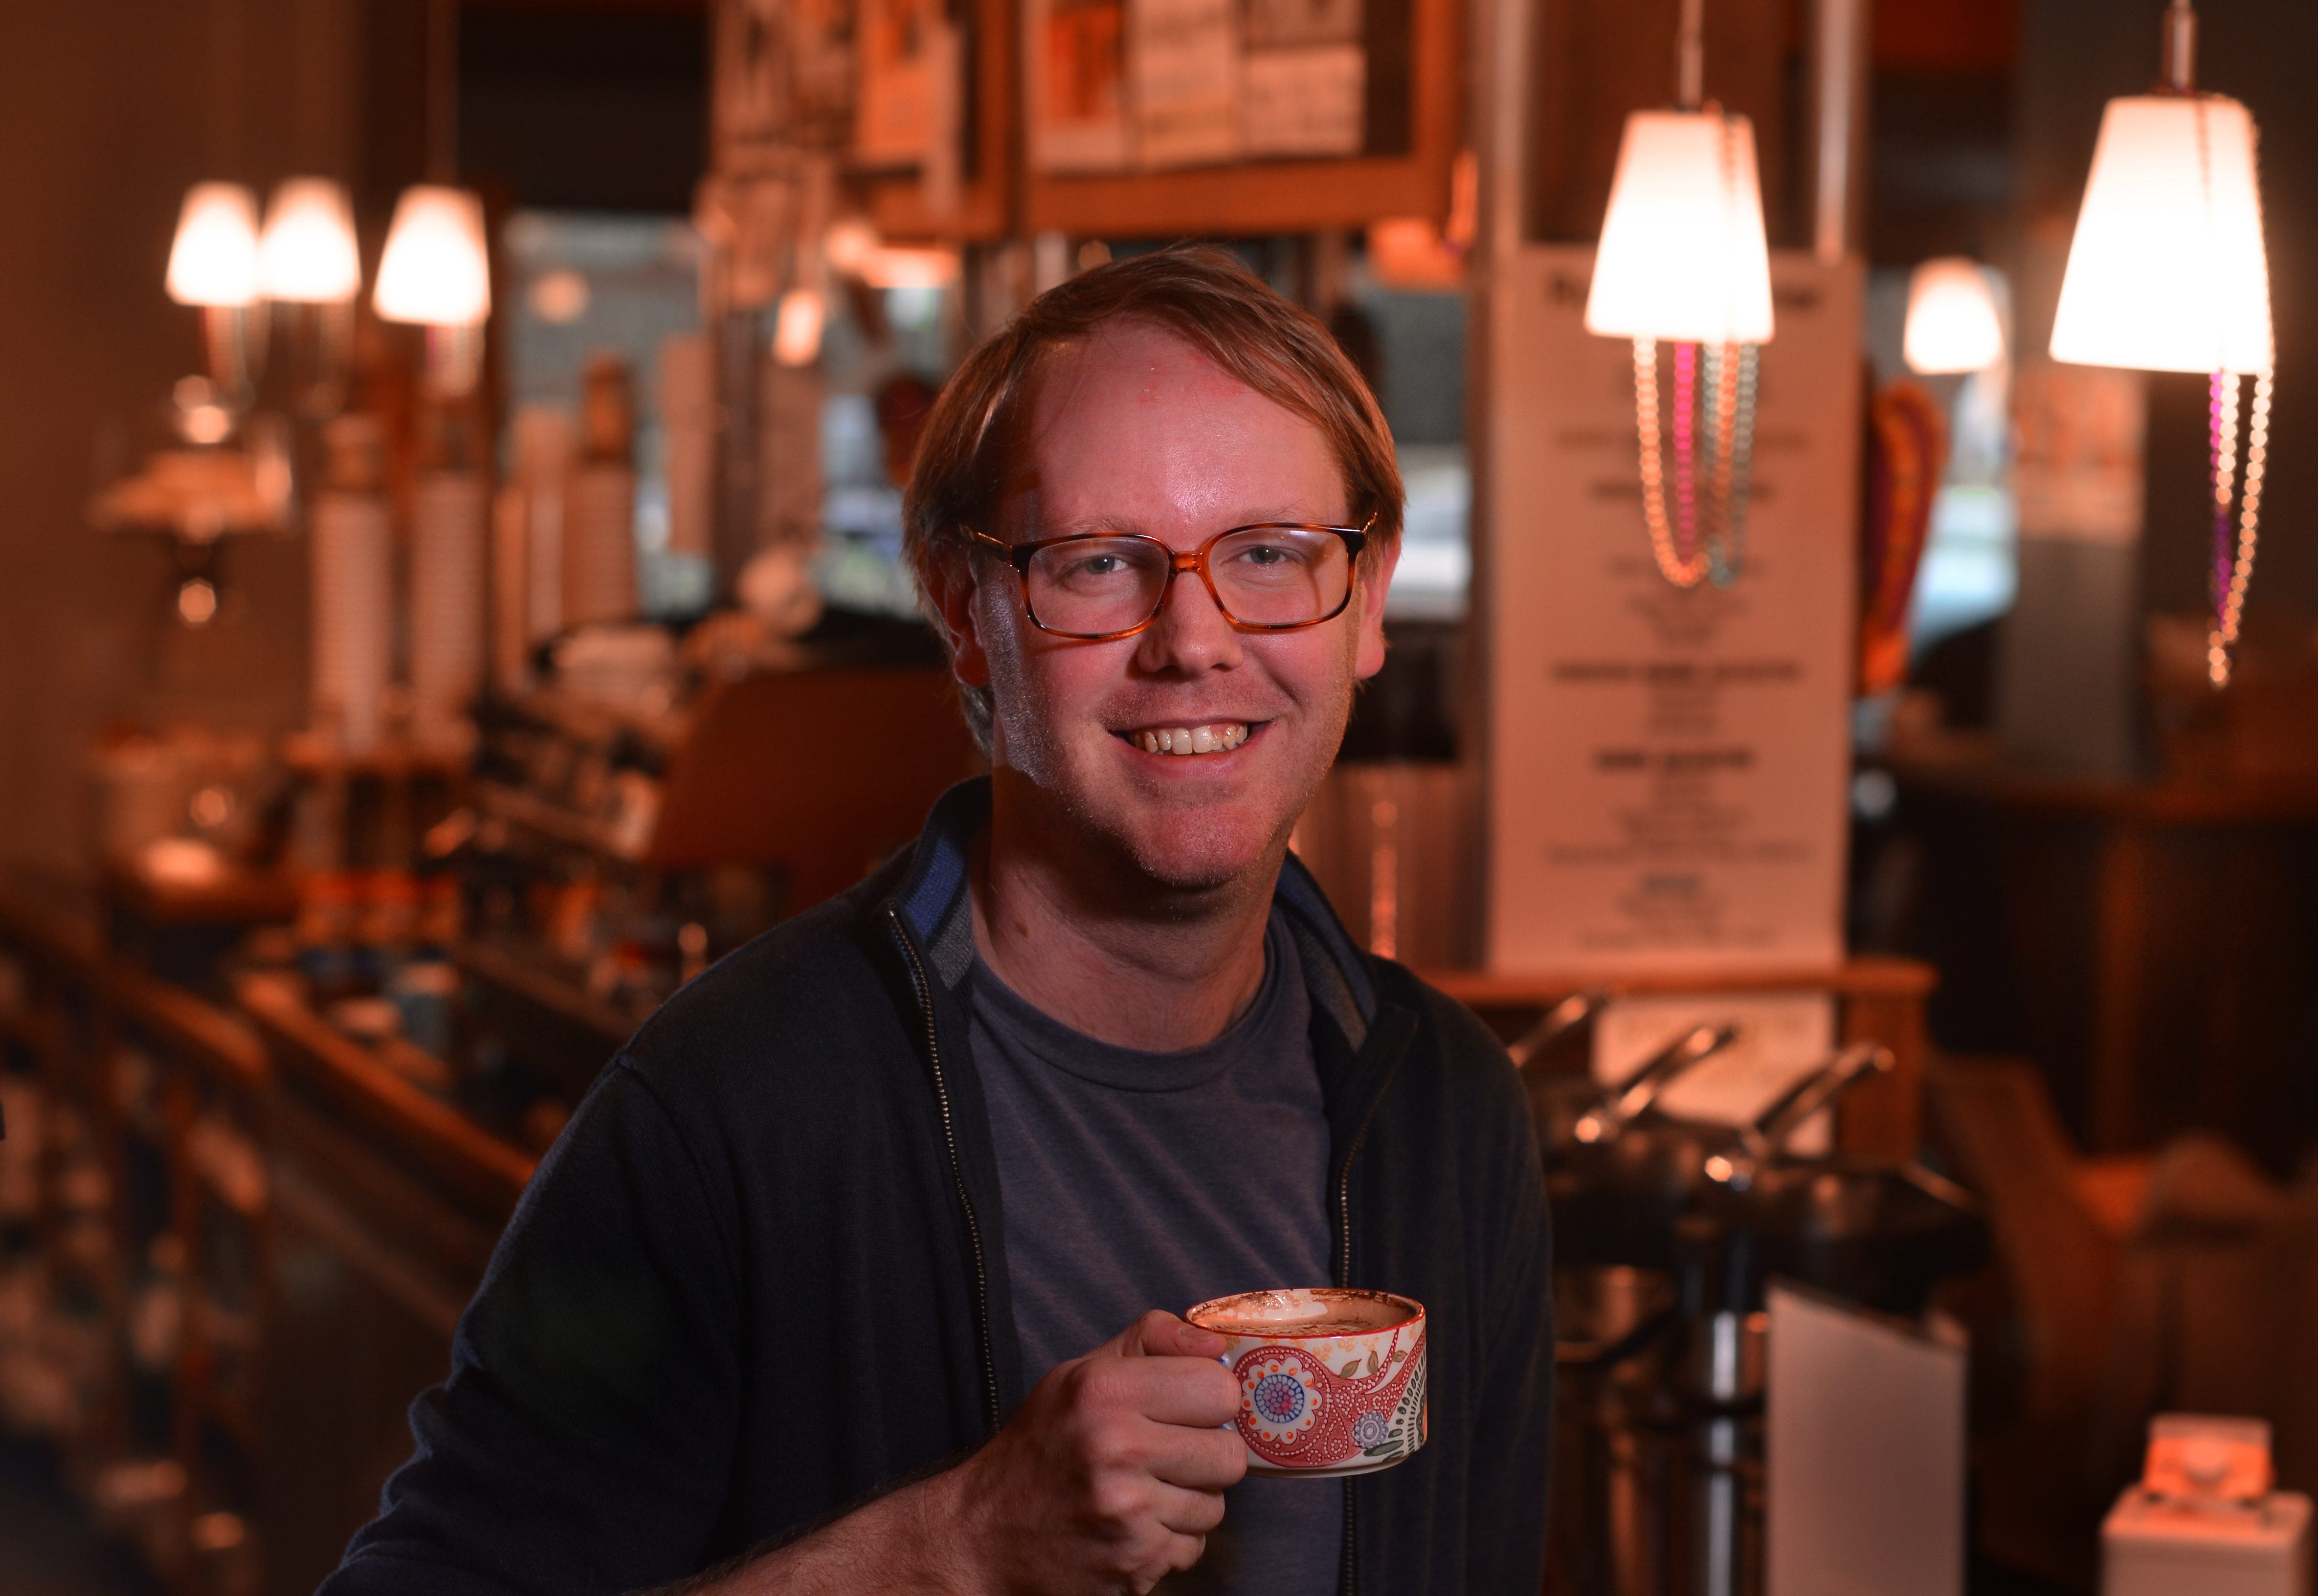 Joey Geier is shown at The Coffee Bar in Spartanburg on Jan. 17. Geier will be traveling with Coffee Bar owner Gervais Hollowell, to Nicaragua on Wednesday.